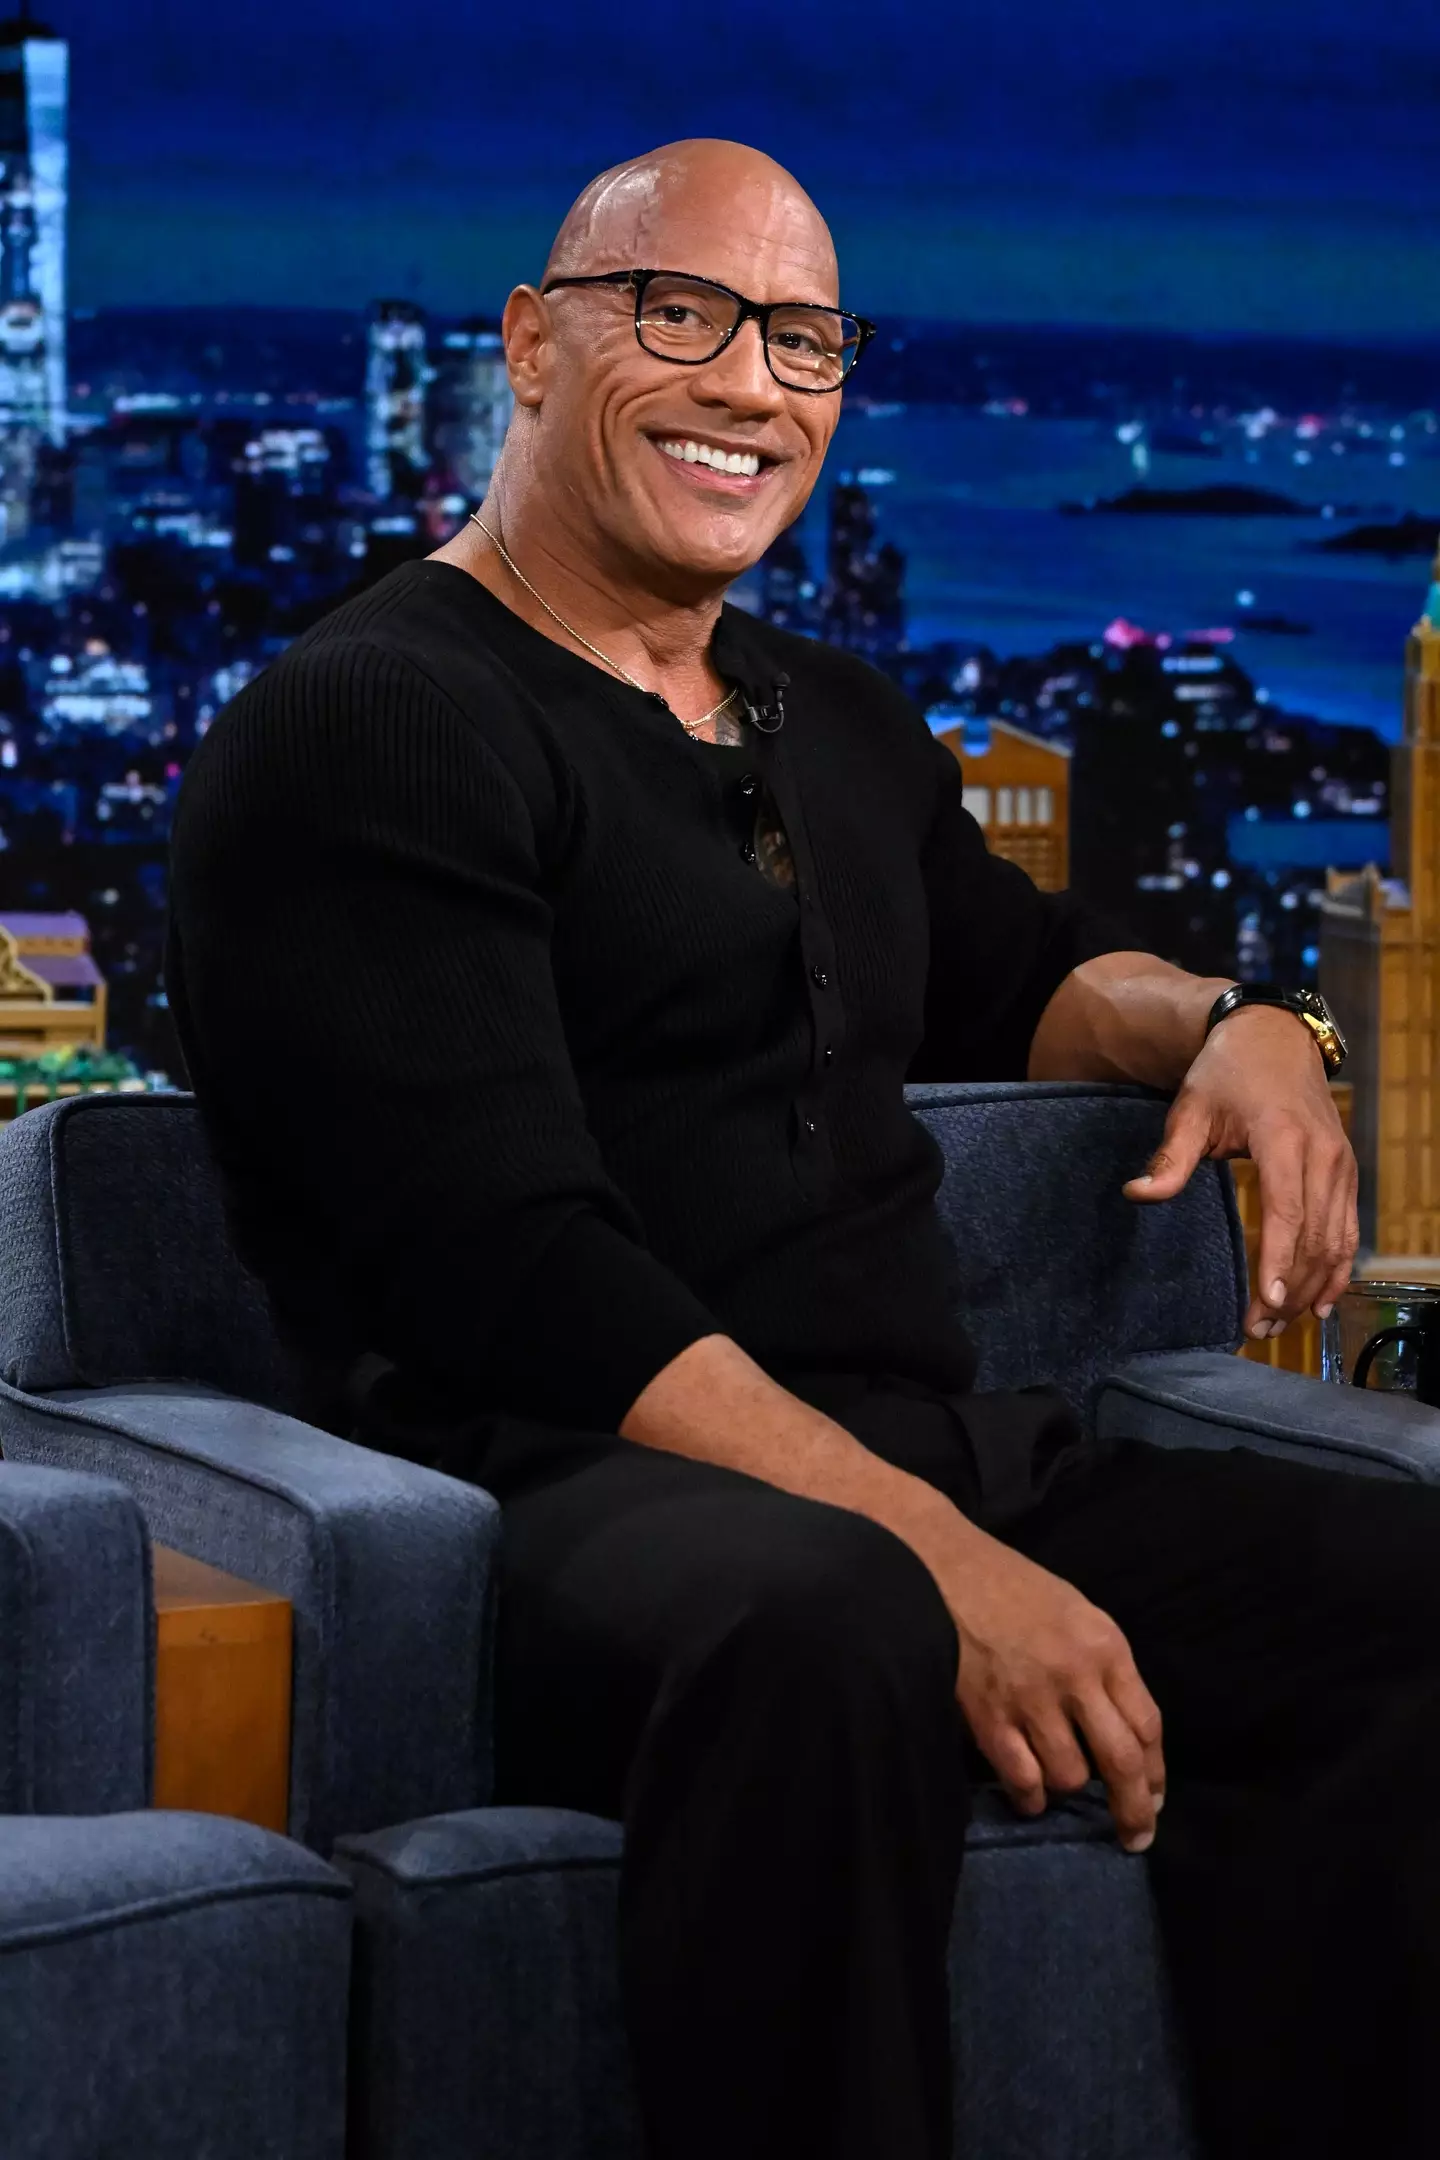 Many of Dwayne Johnson's movies have been box office hits.